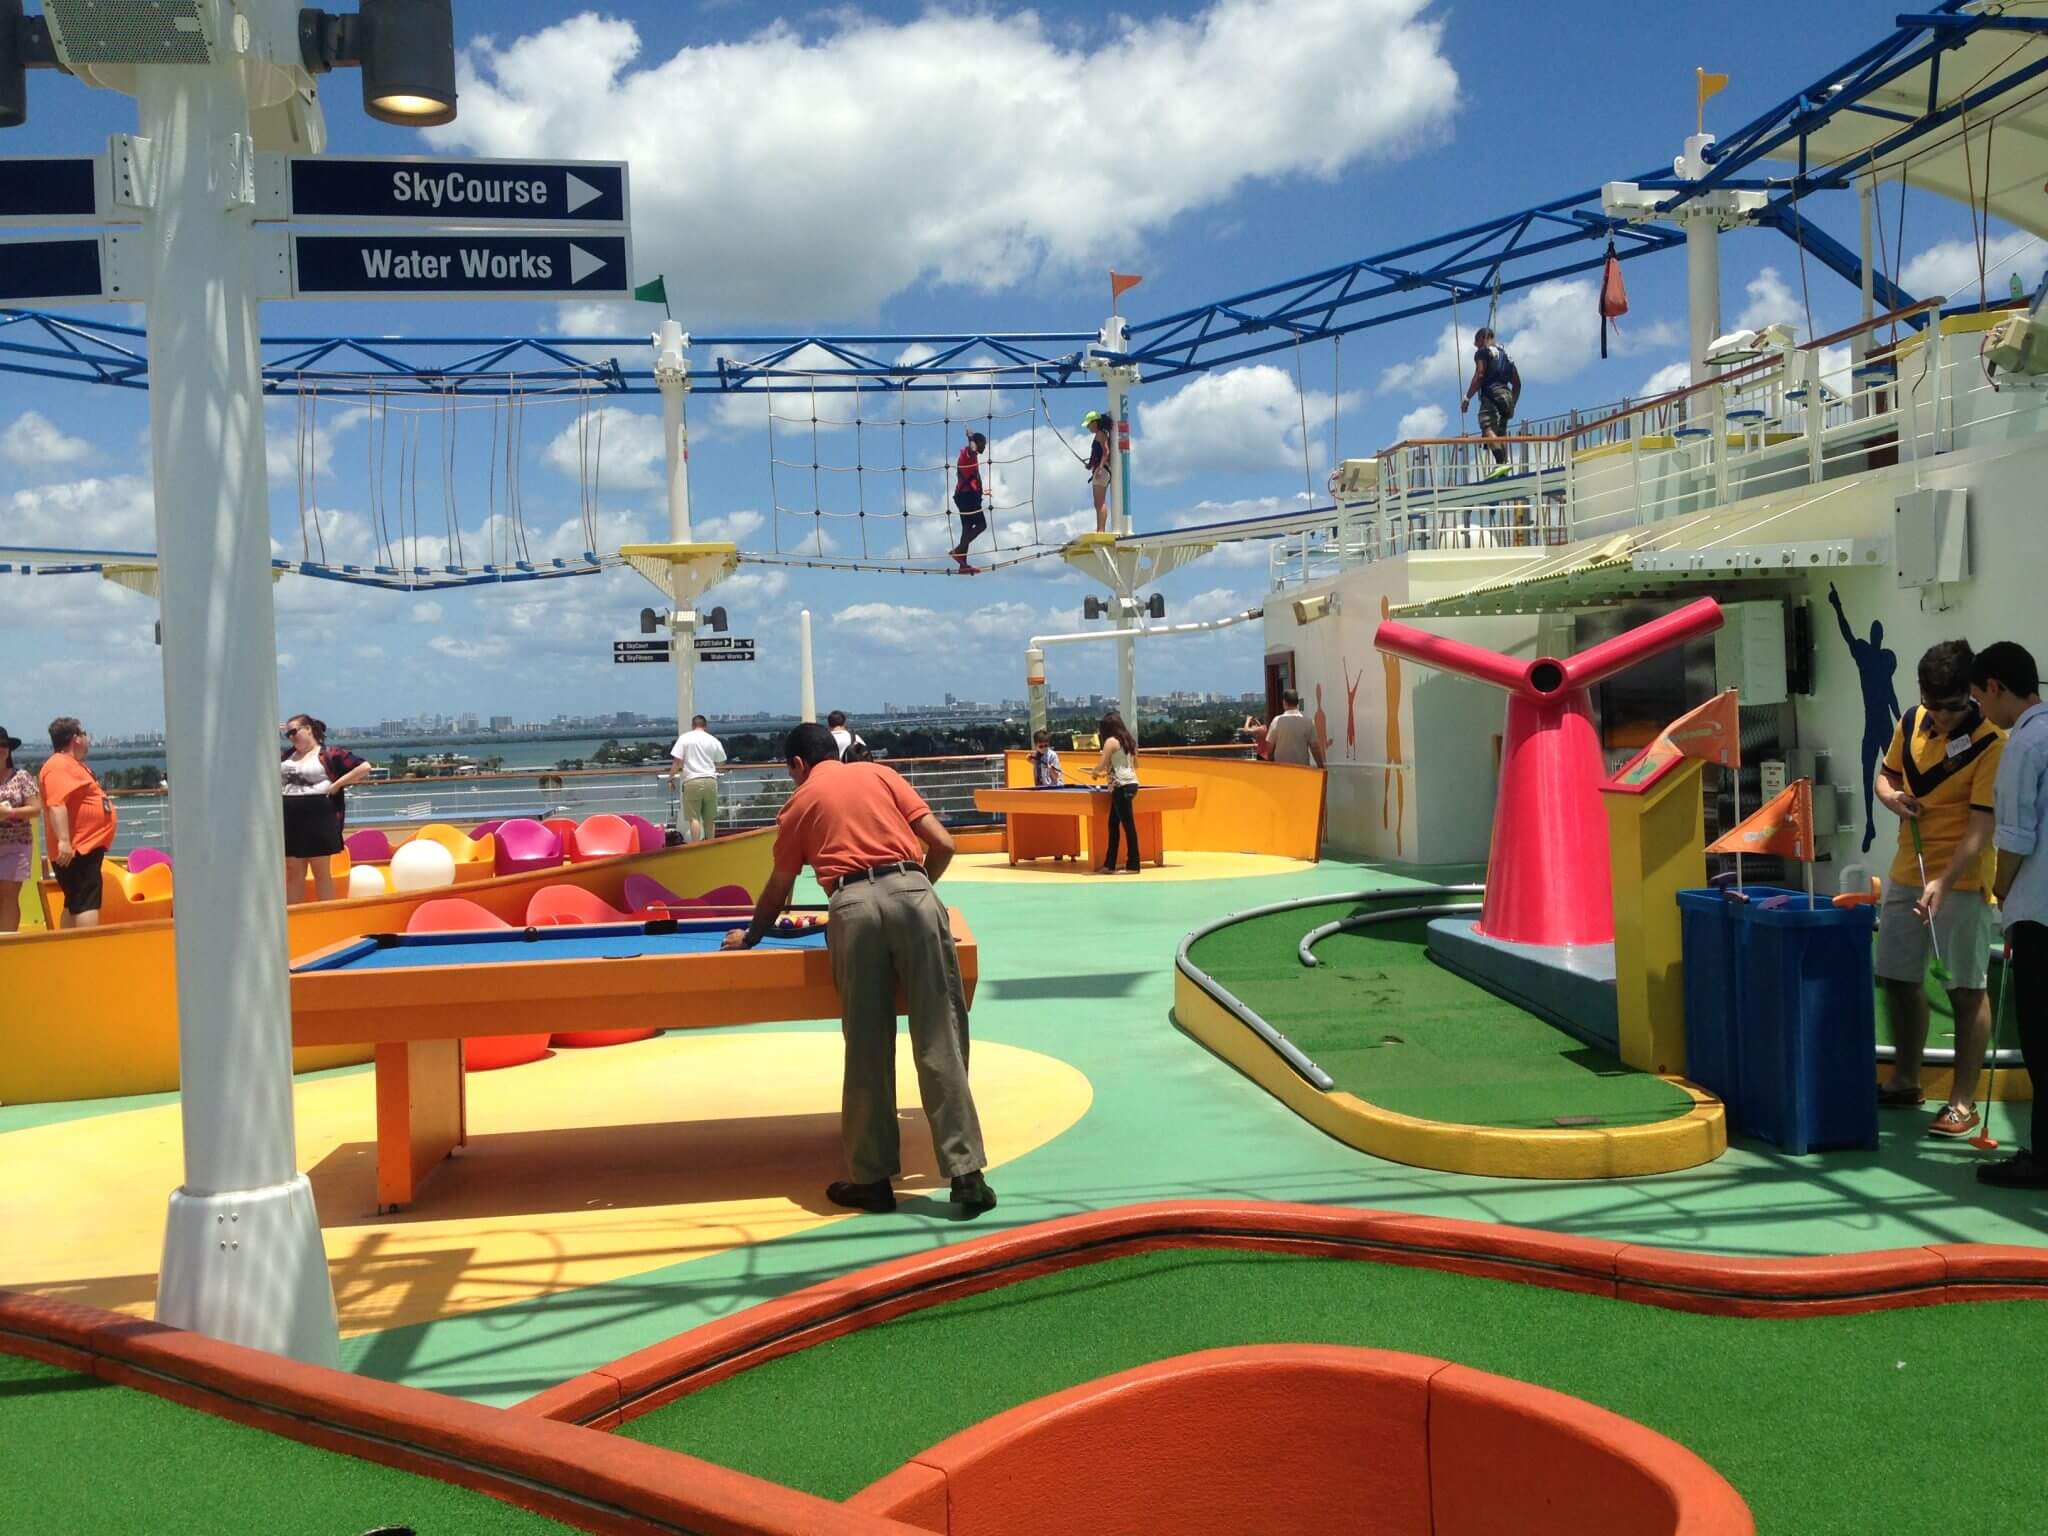 The Sports Zone onboard the Carnival Breeze